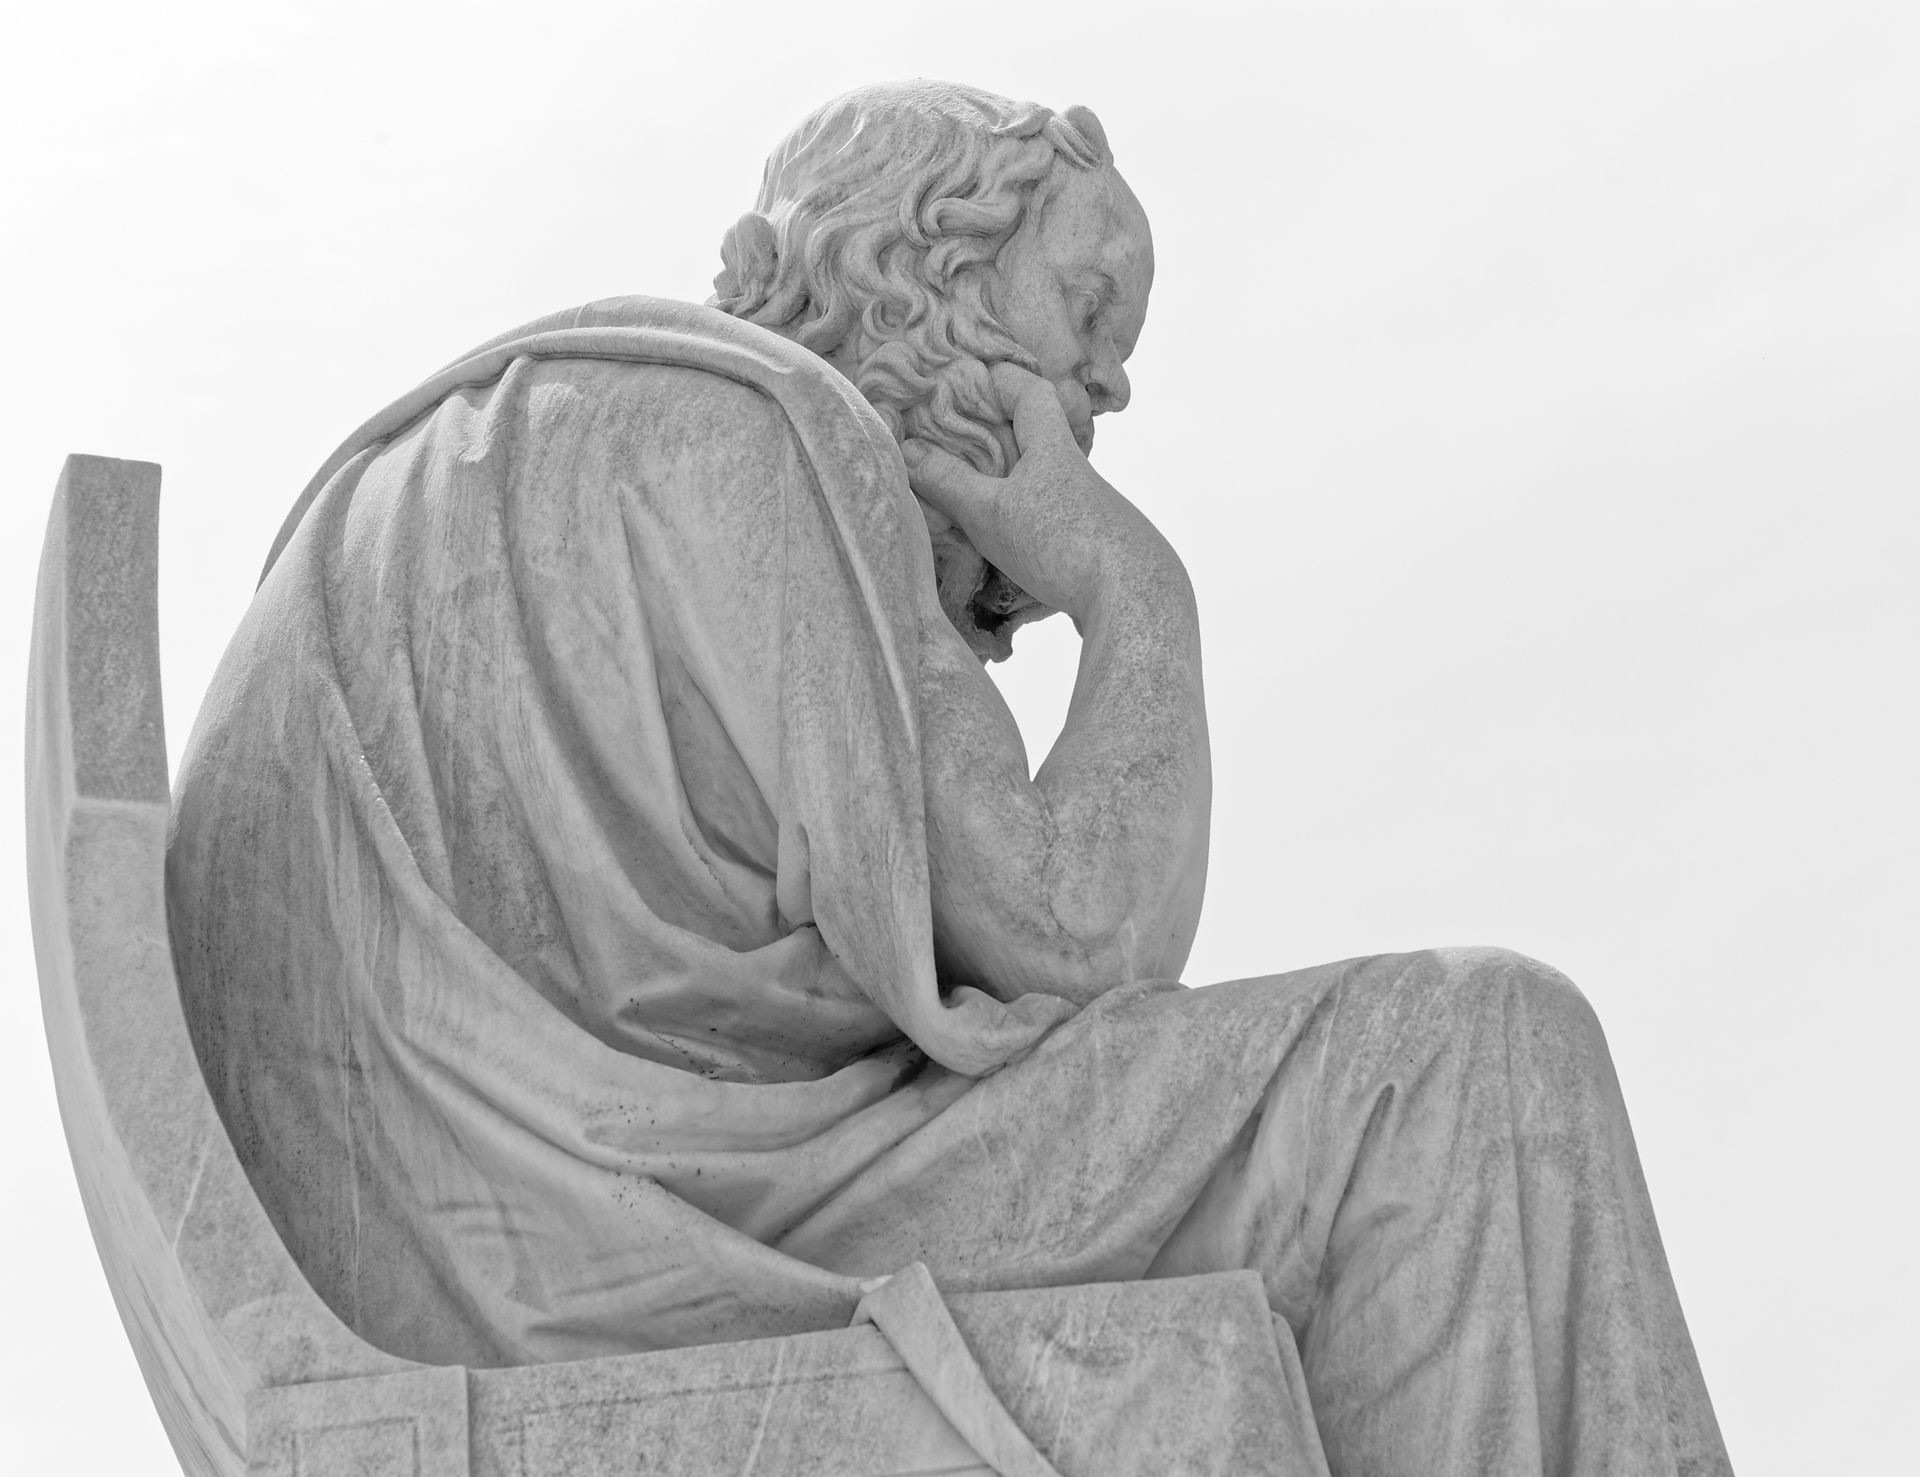 Socrates the ancient greek philosopher in deep thoughts, space for text